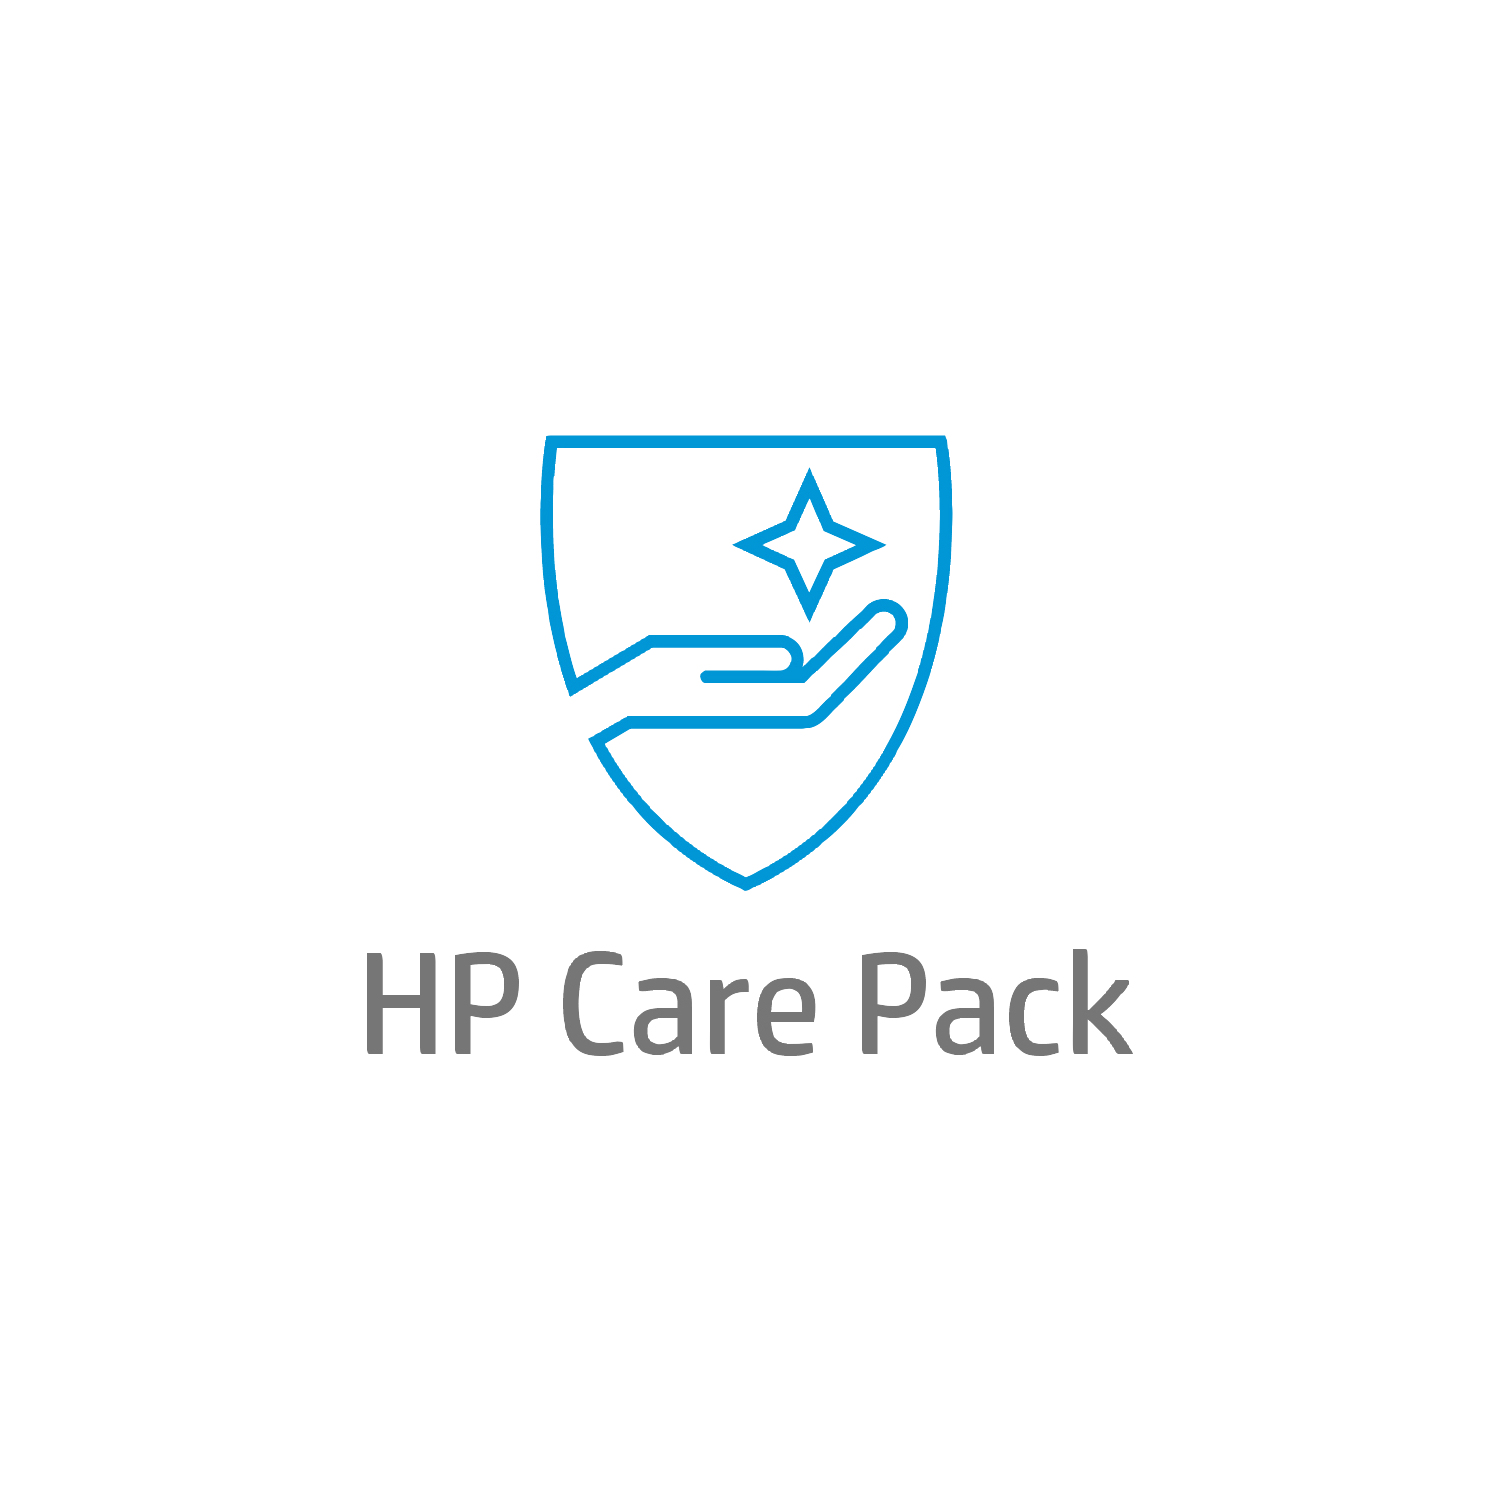 HP 3y 9x5 Workplace 2000-4999 License Support REQUIRED for ea. software lic. Purchased